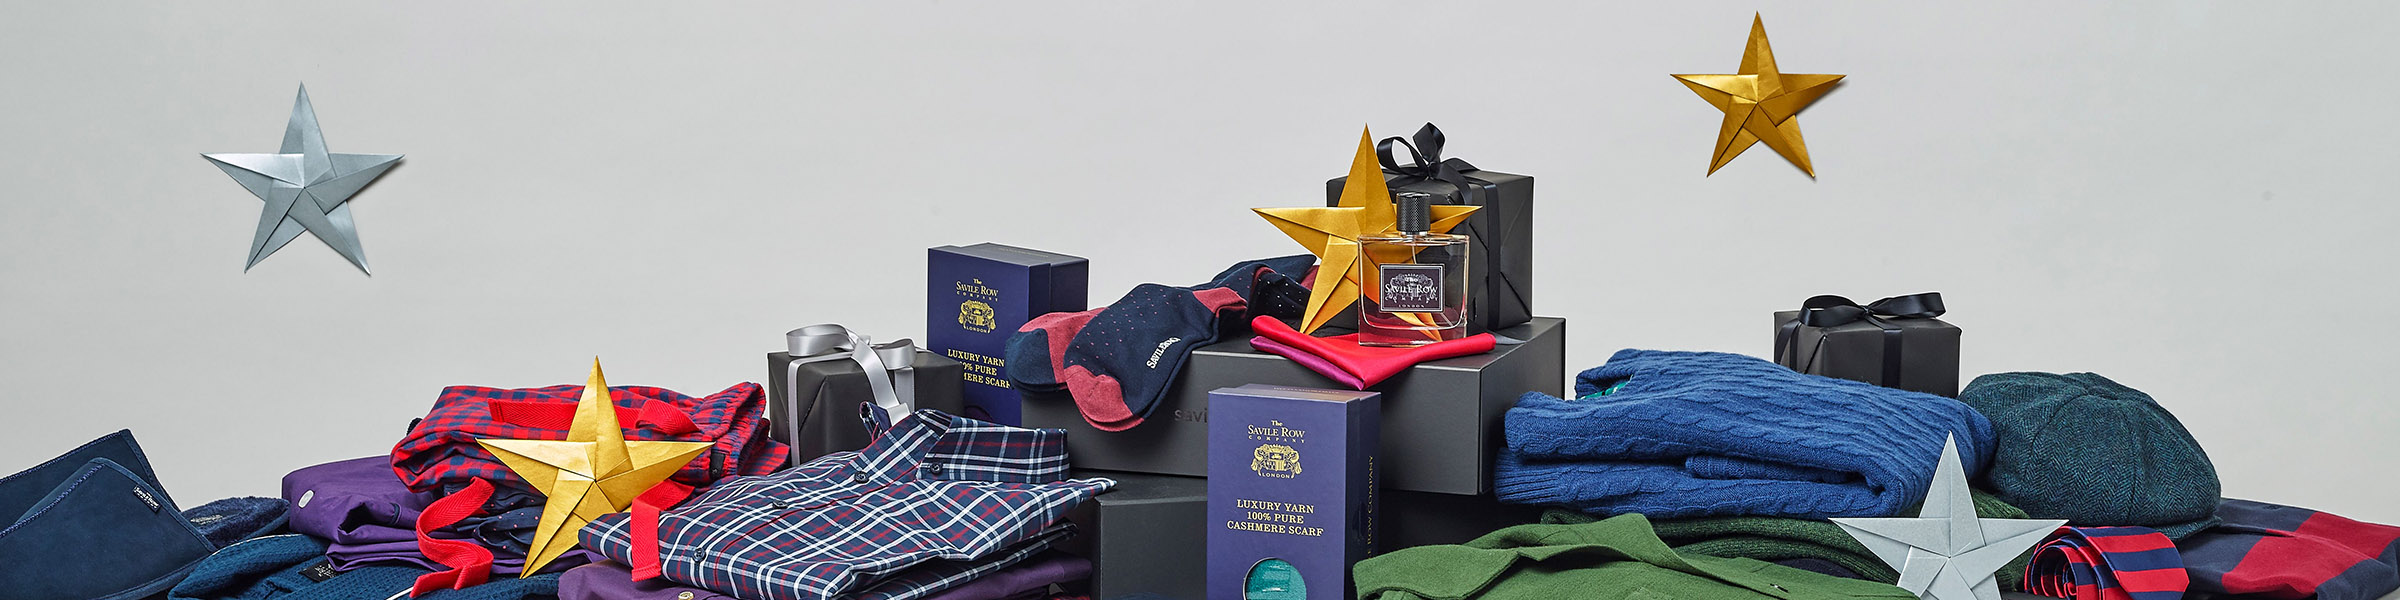 Luxury gifts for men to choose from